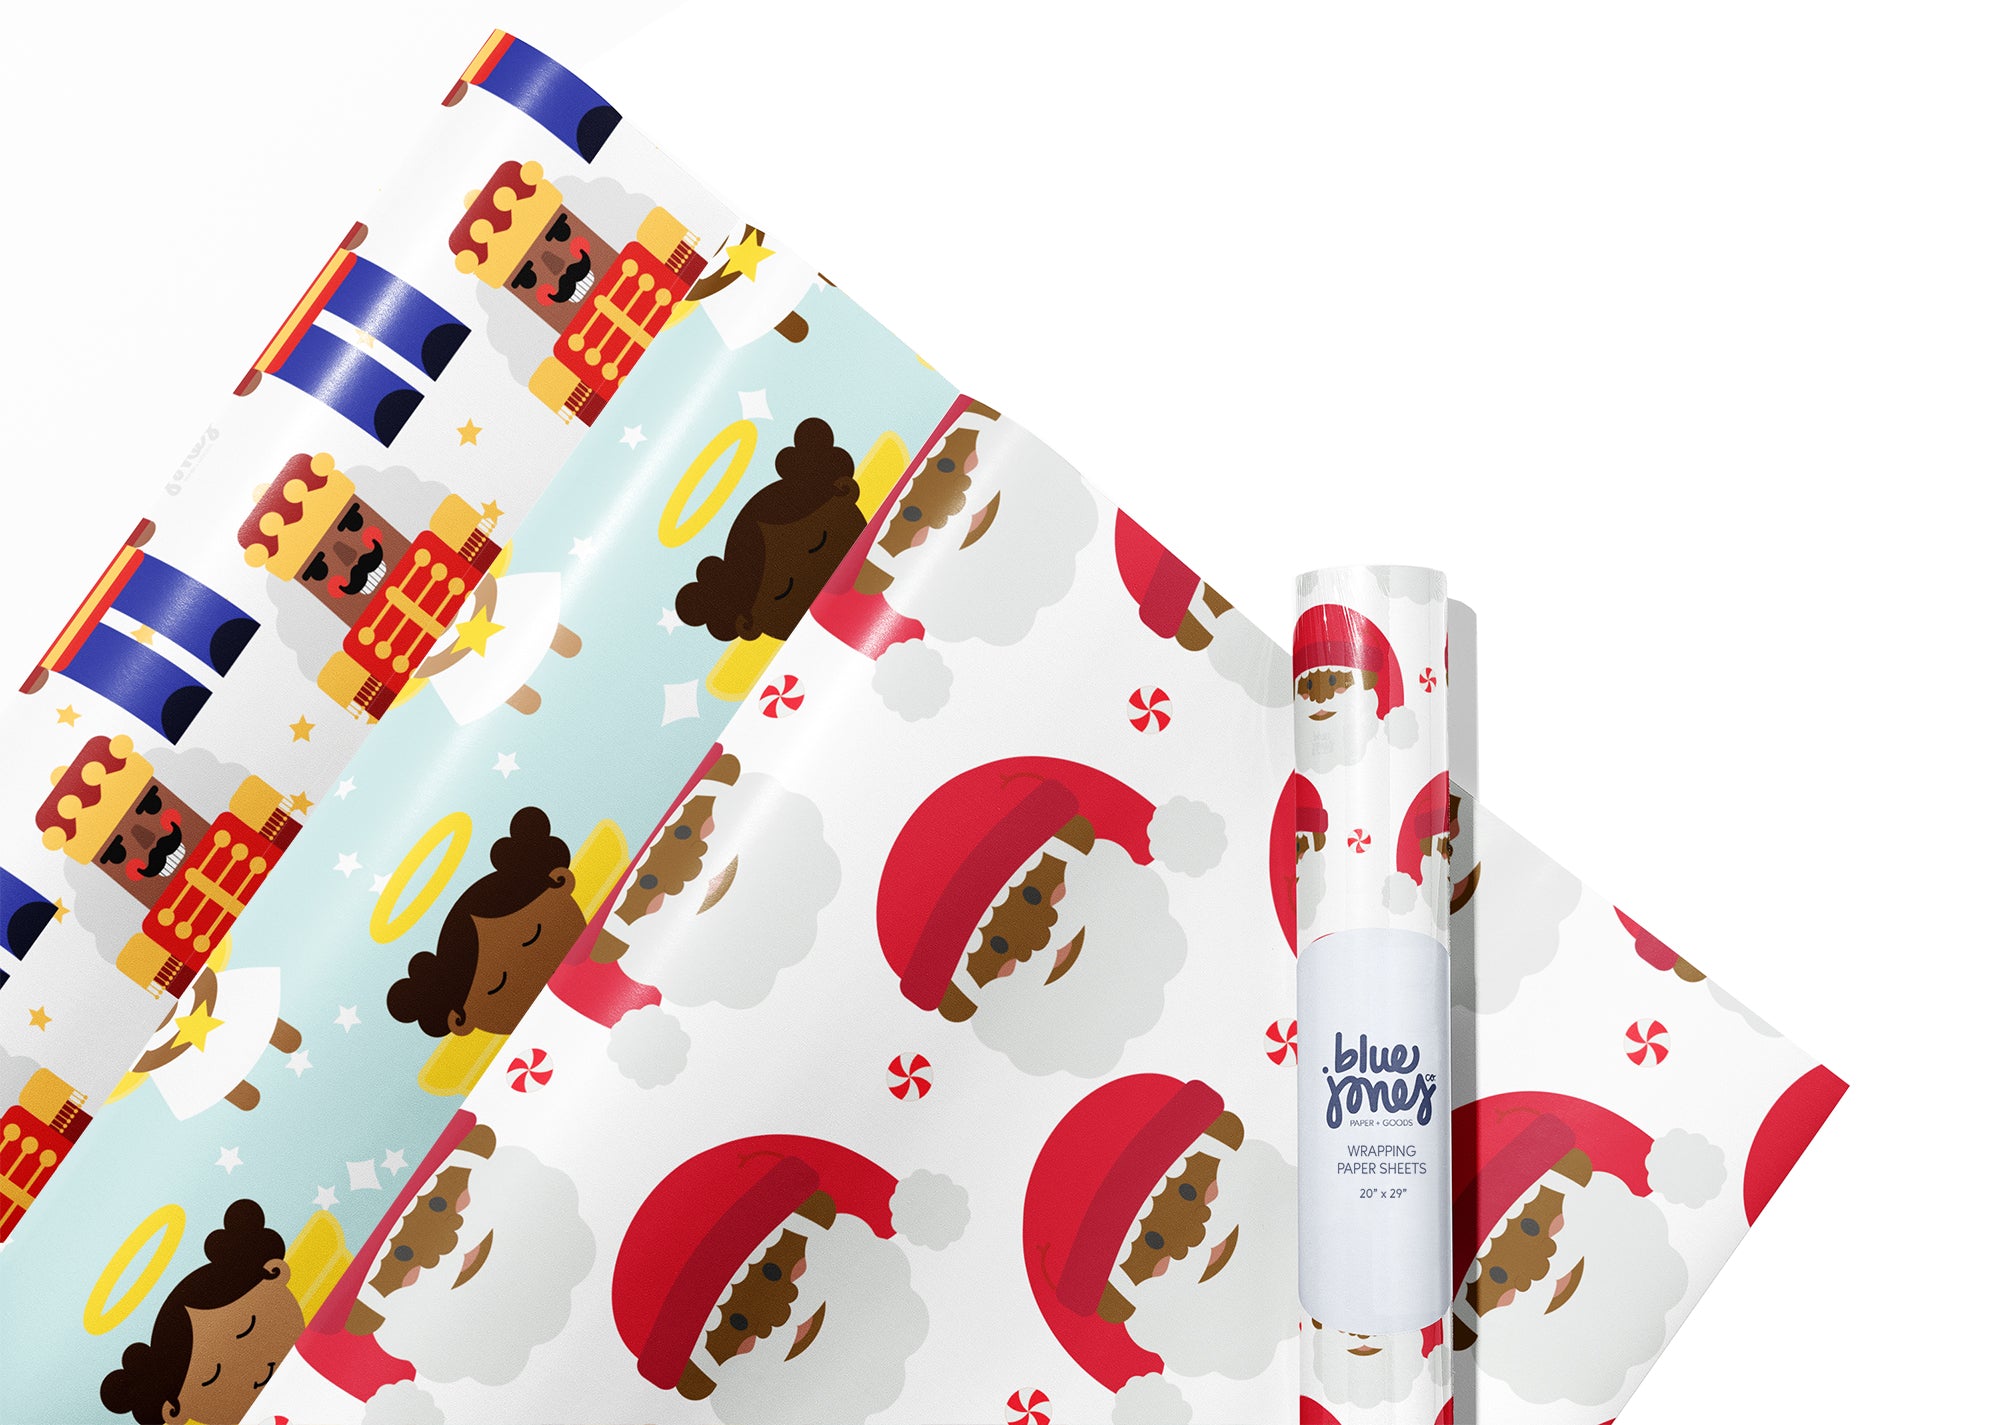 A Chestnut Black Christmas Wrapping Paper (Blue) – Chestnut